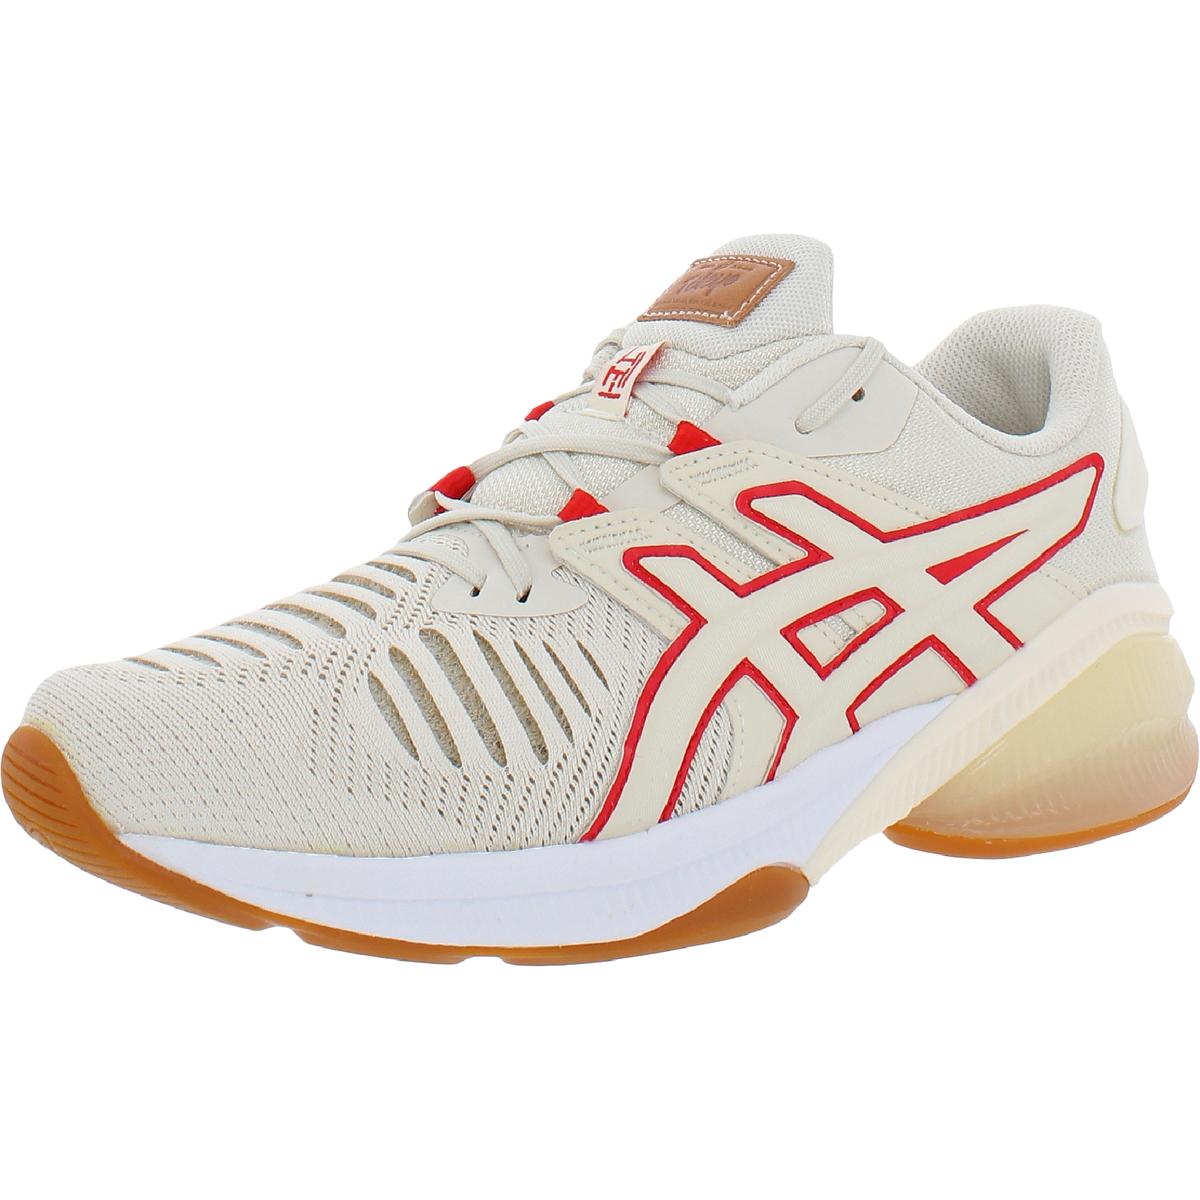 ASICS Gel-Quantum Infinity Jin Womens Fitness Athletic Running Shoes